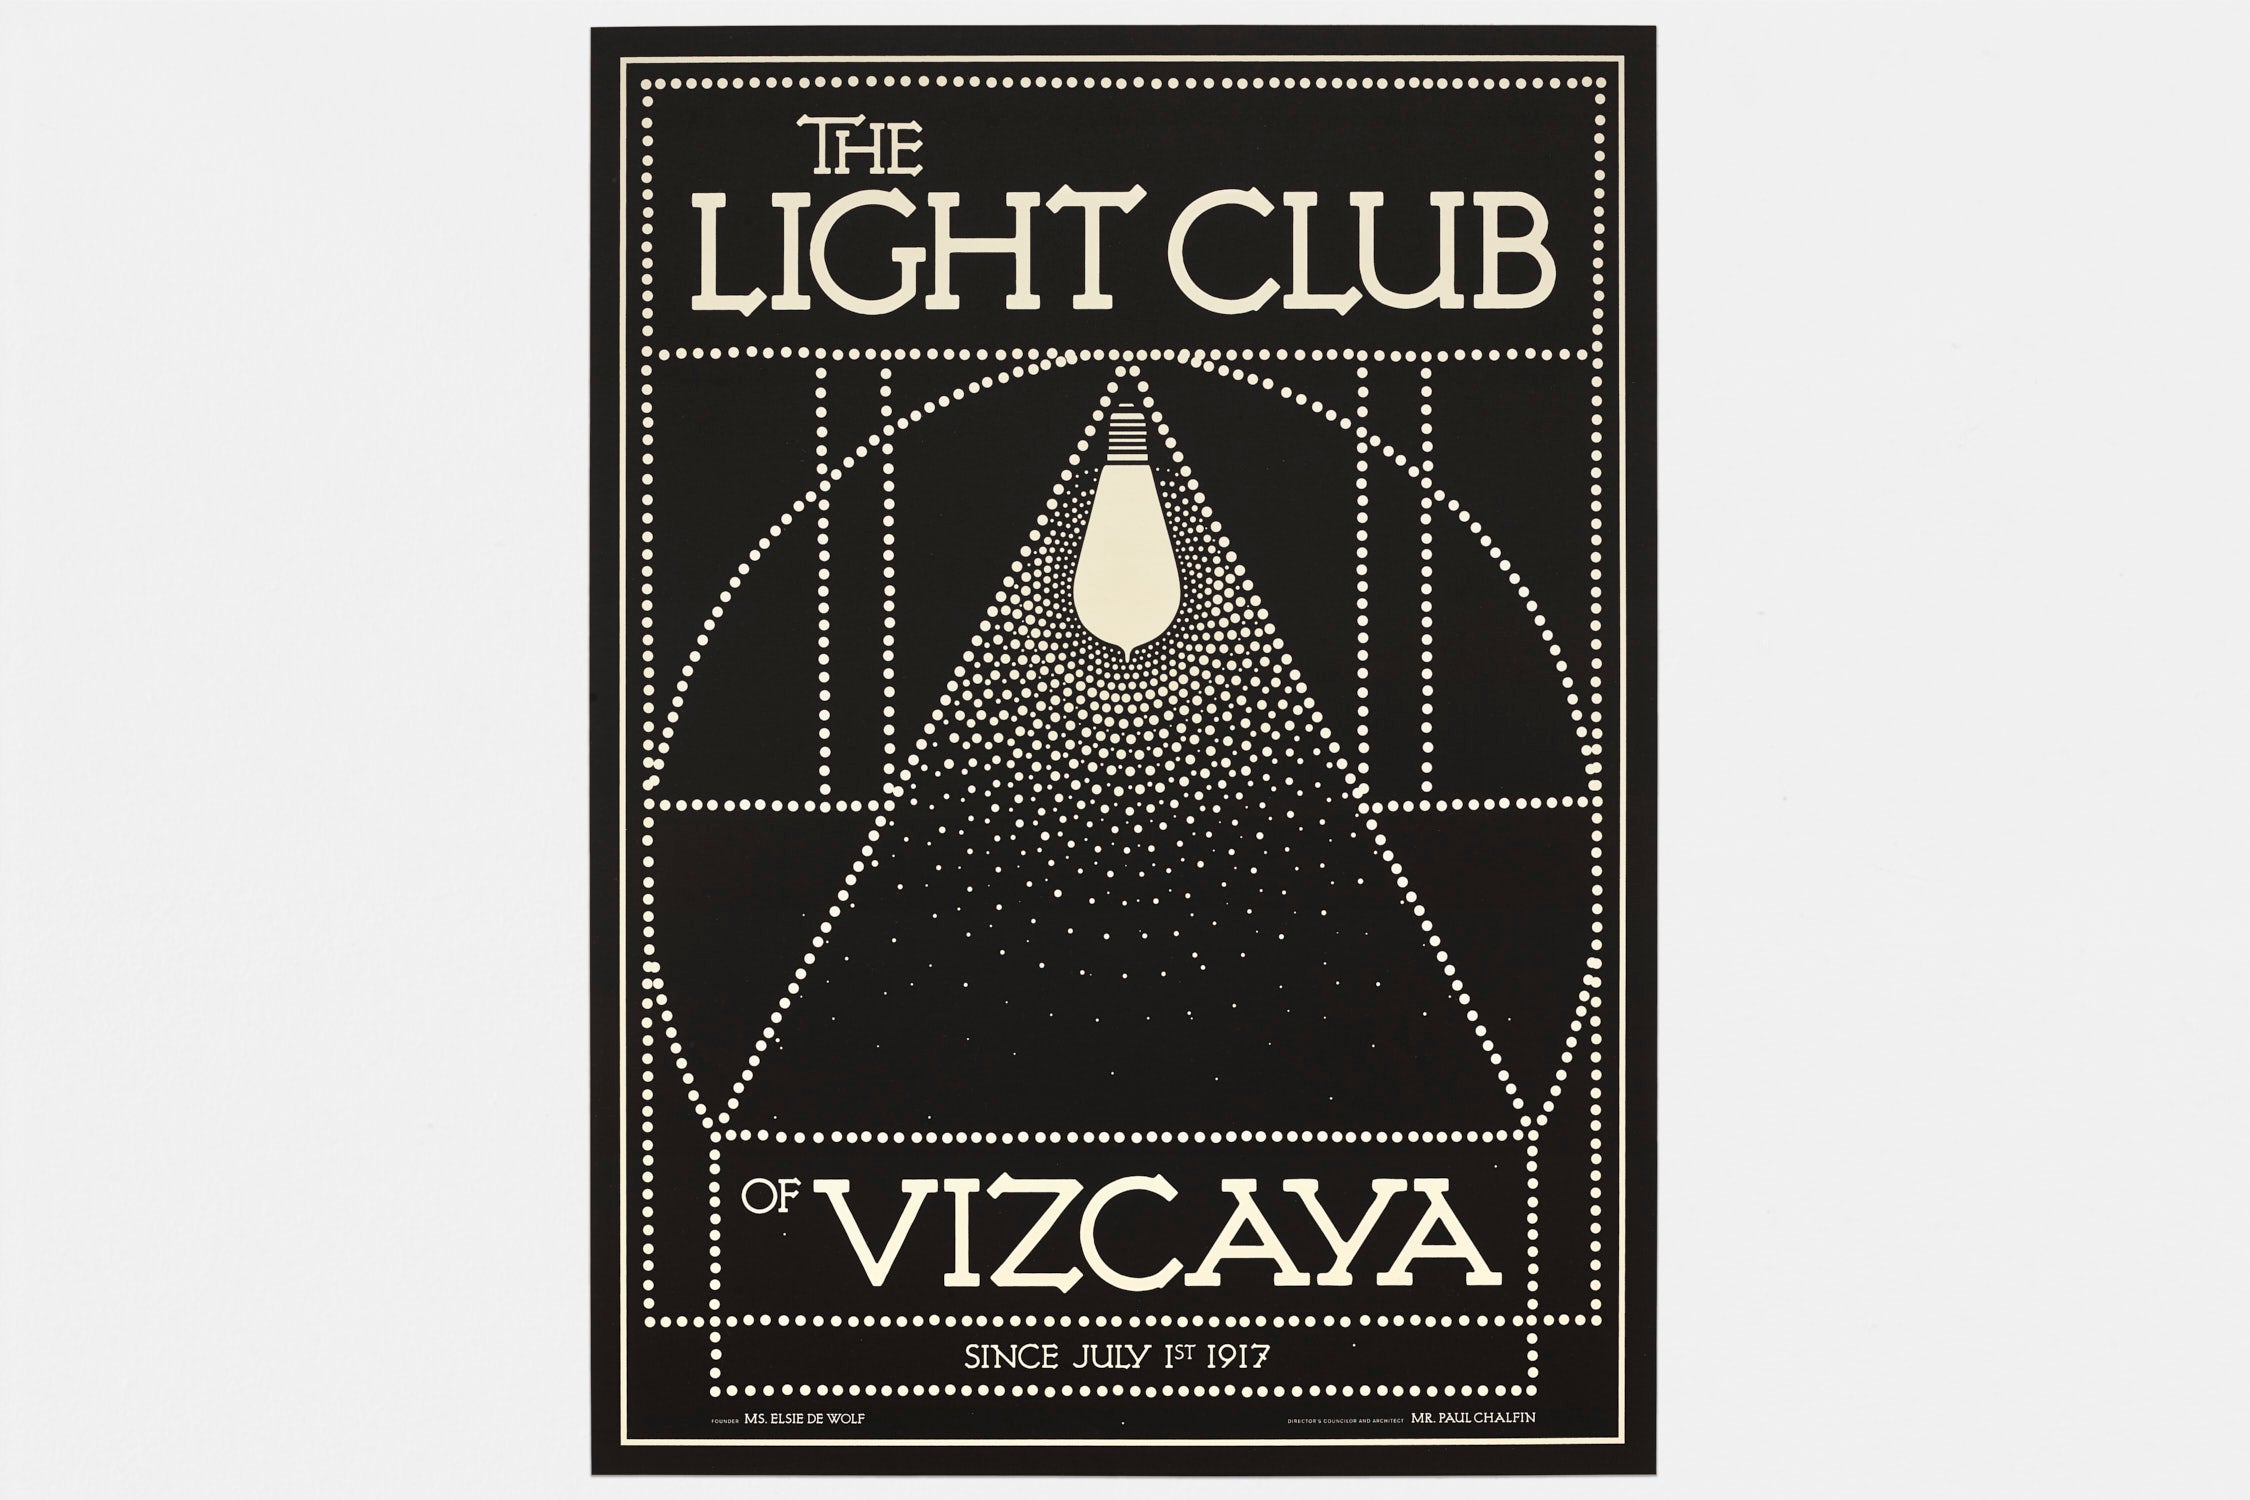 Josiah McElheny and Conny Purtill  'Poster for the 100th Anniversary of the Light Club of Vizcaya' (2017)